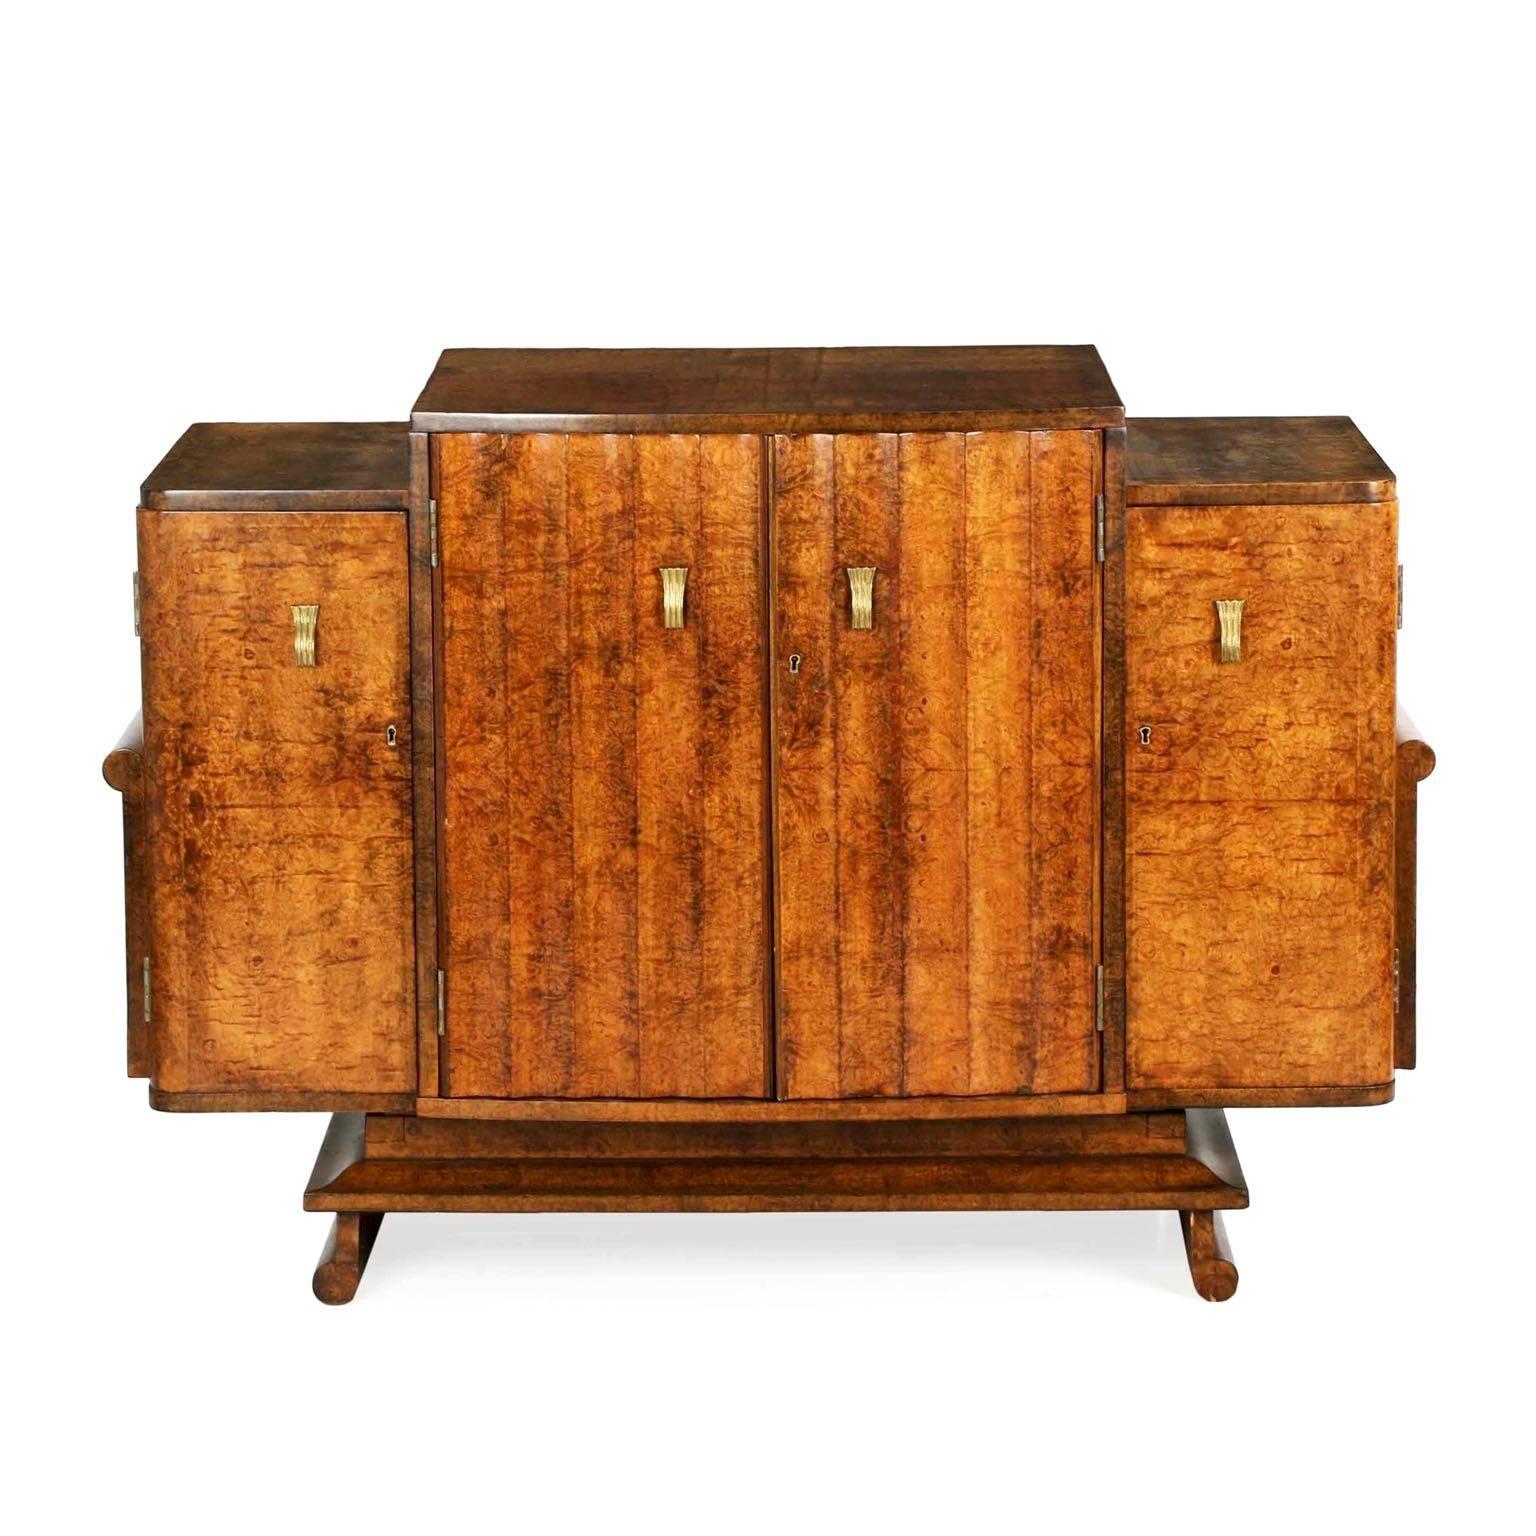 A most interesting and imaginative piece, this fine amboyna veneered console features a stepped top with a pair of central doors with a repeating cove form that is opposed in the outward curls of the vertical planes on either side of the console and